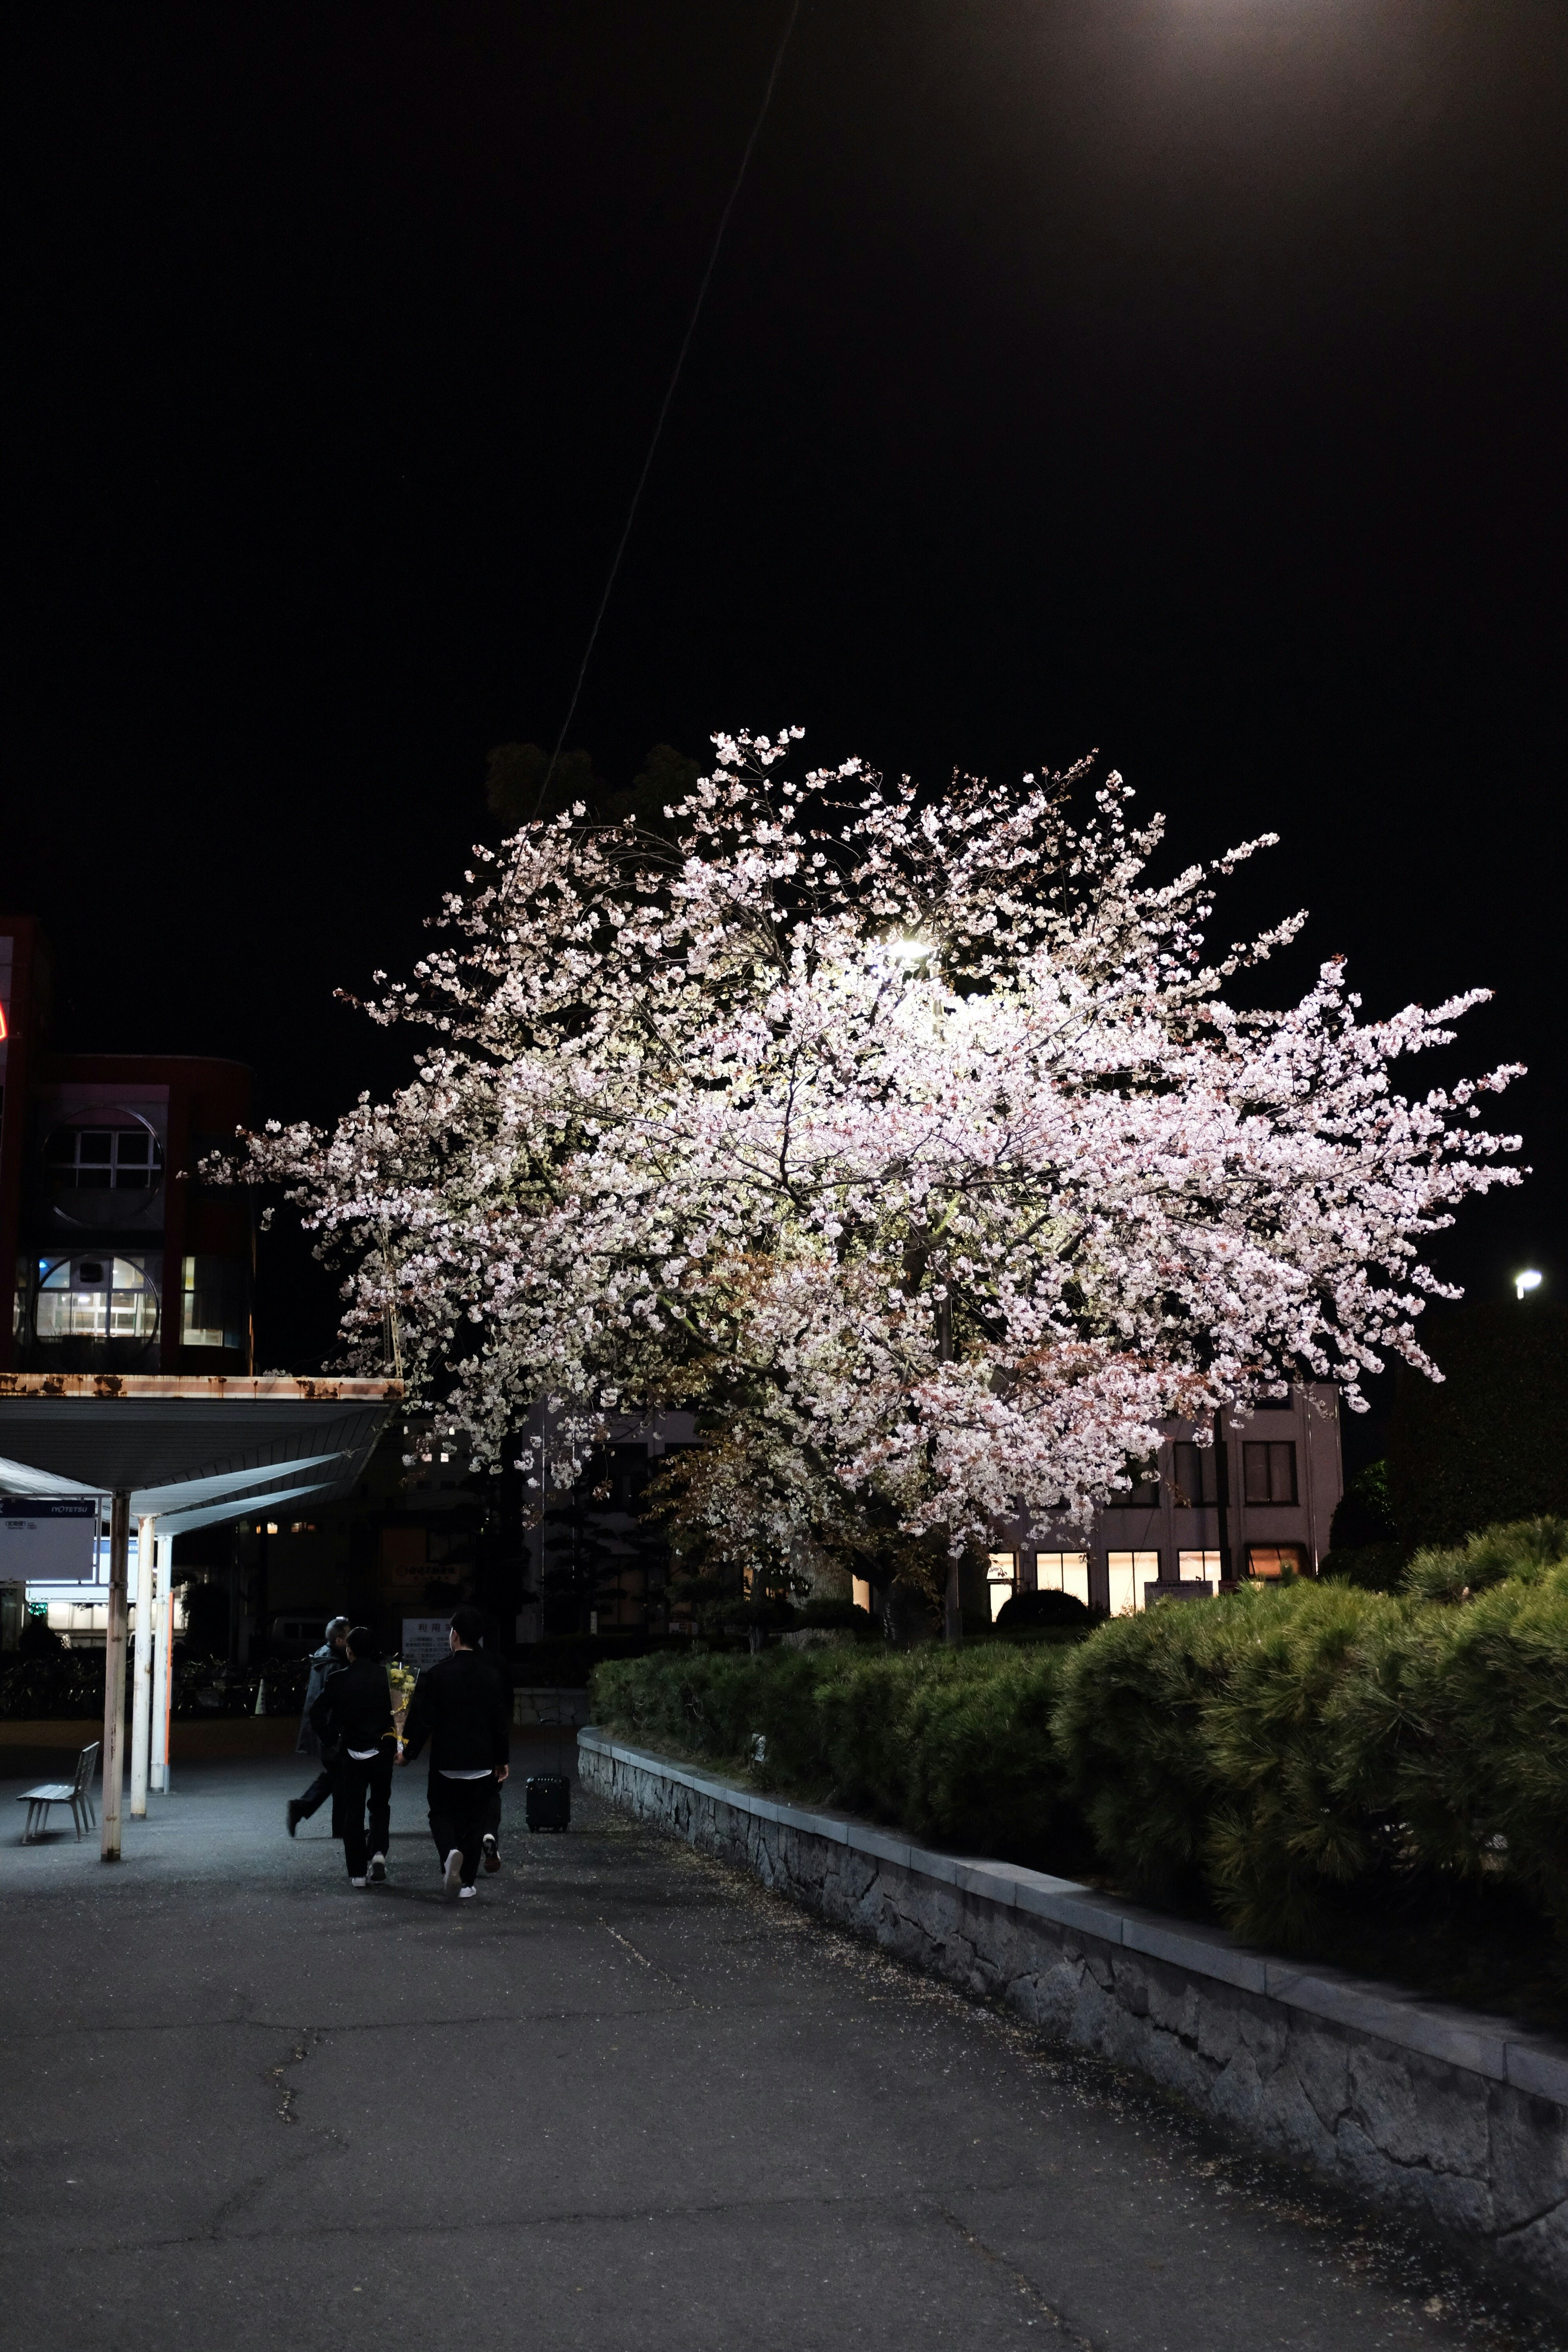 people walking on sidewalk near white cherry blossom tree during night time